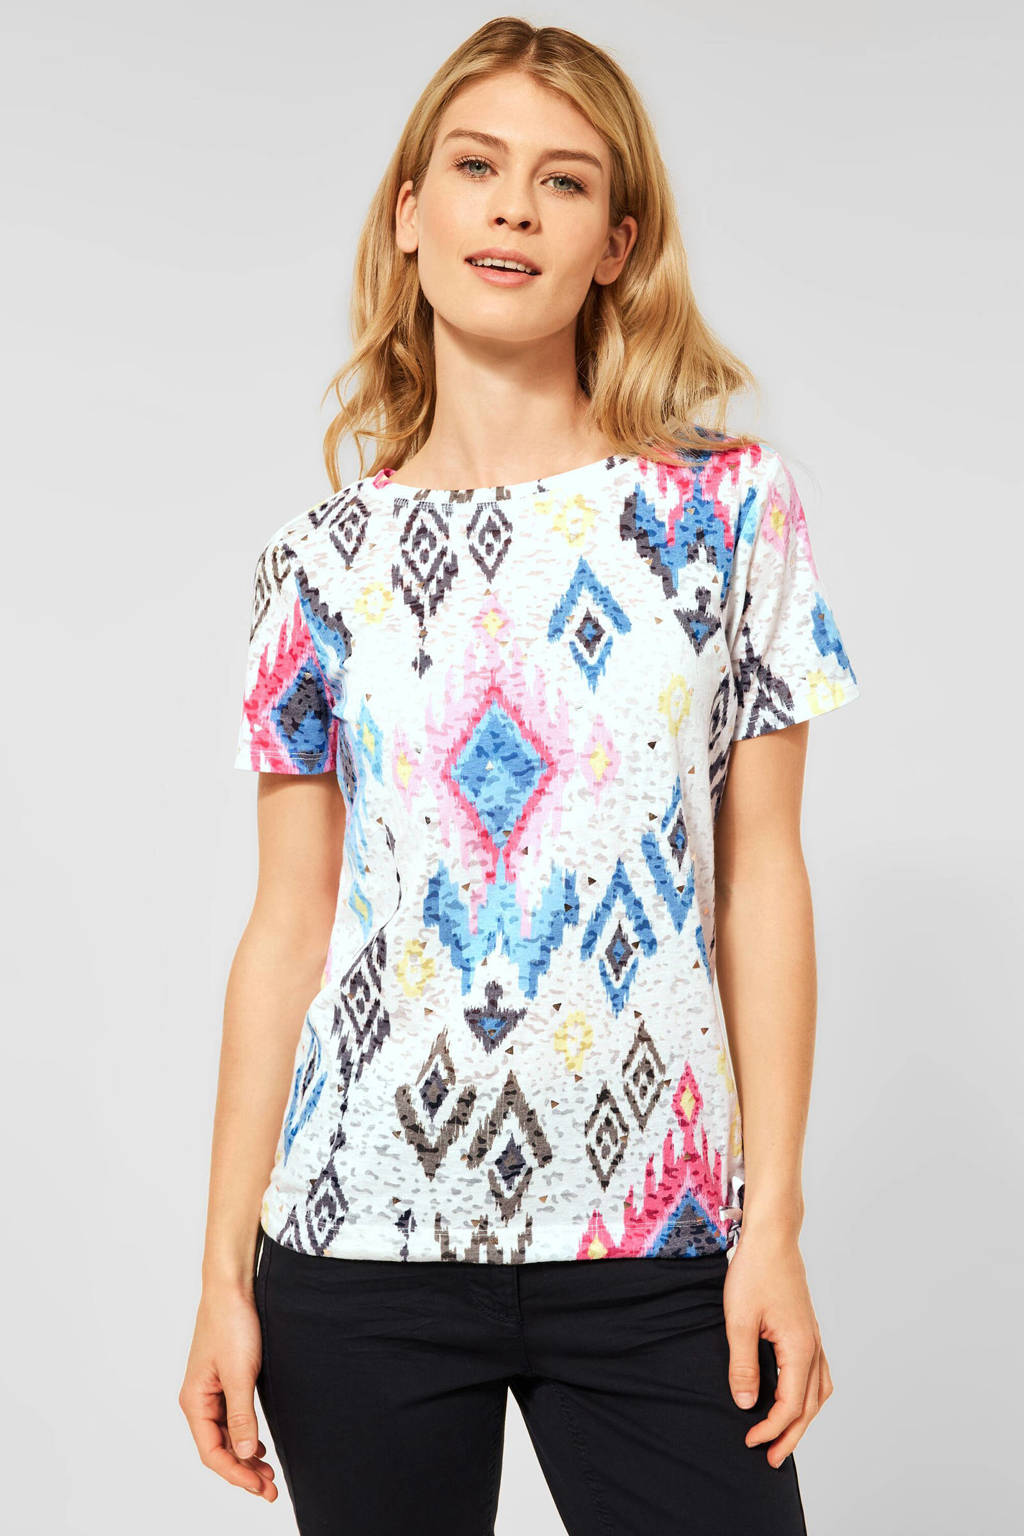 CECIL T-shirt met all over print wit/blauw/roze